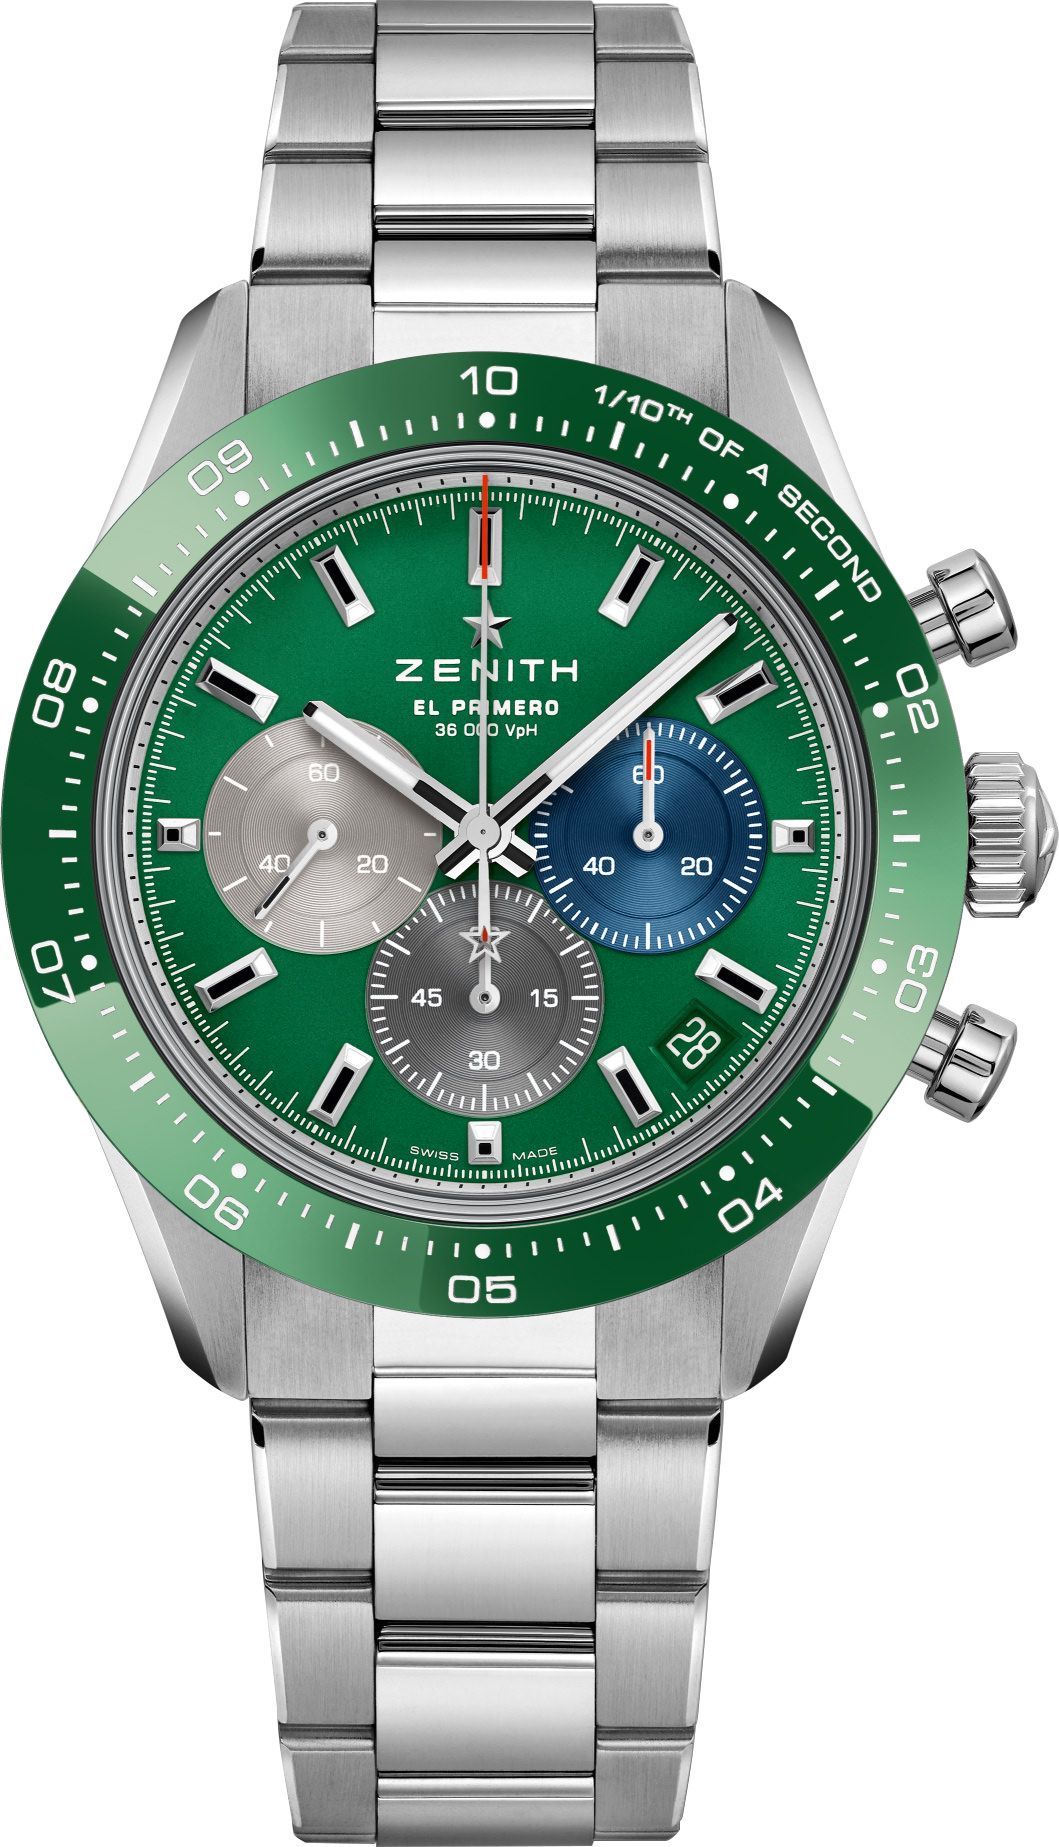 Zenith Chronomaster Sport Green Dial 41 mm Automatic Watch For Unisex - 1